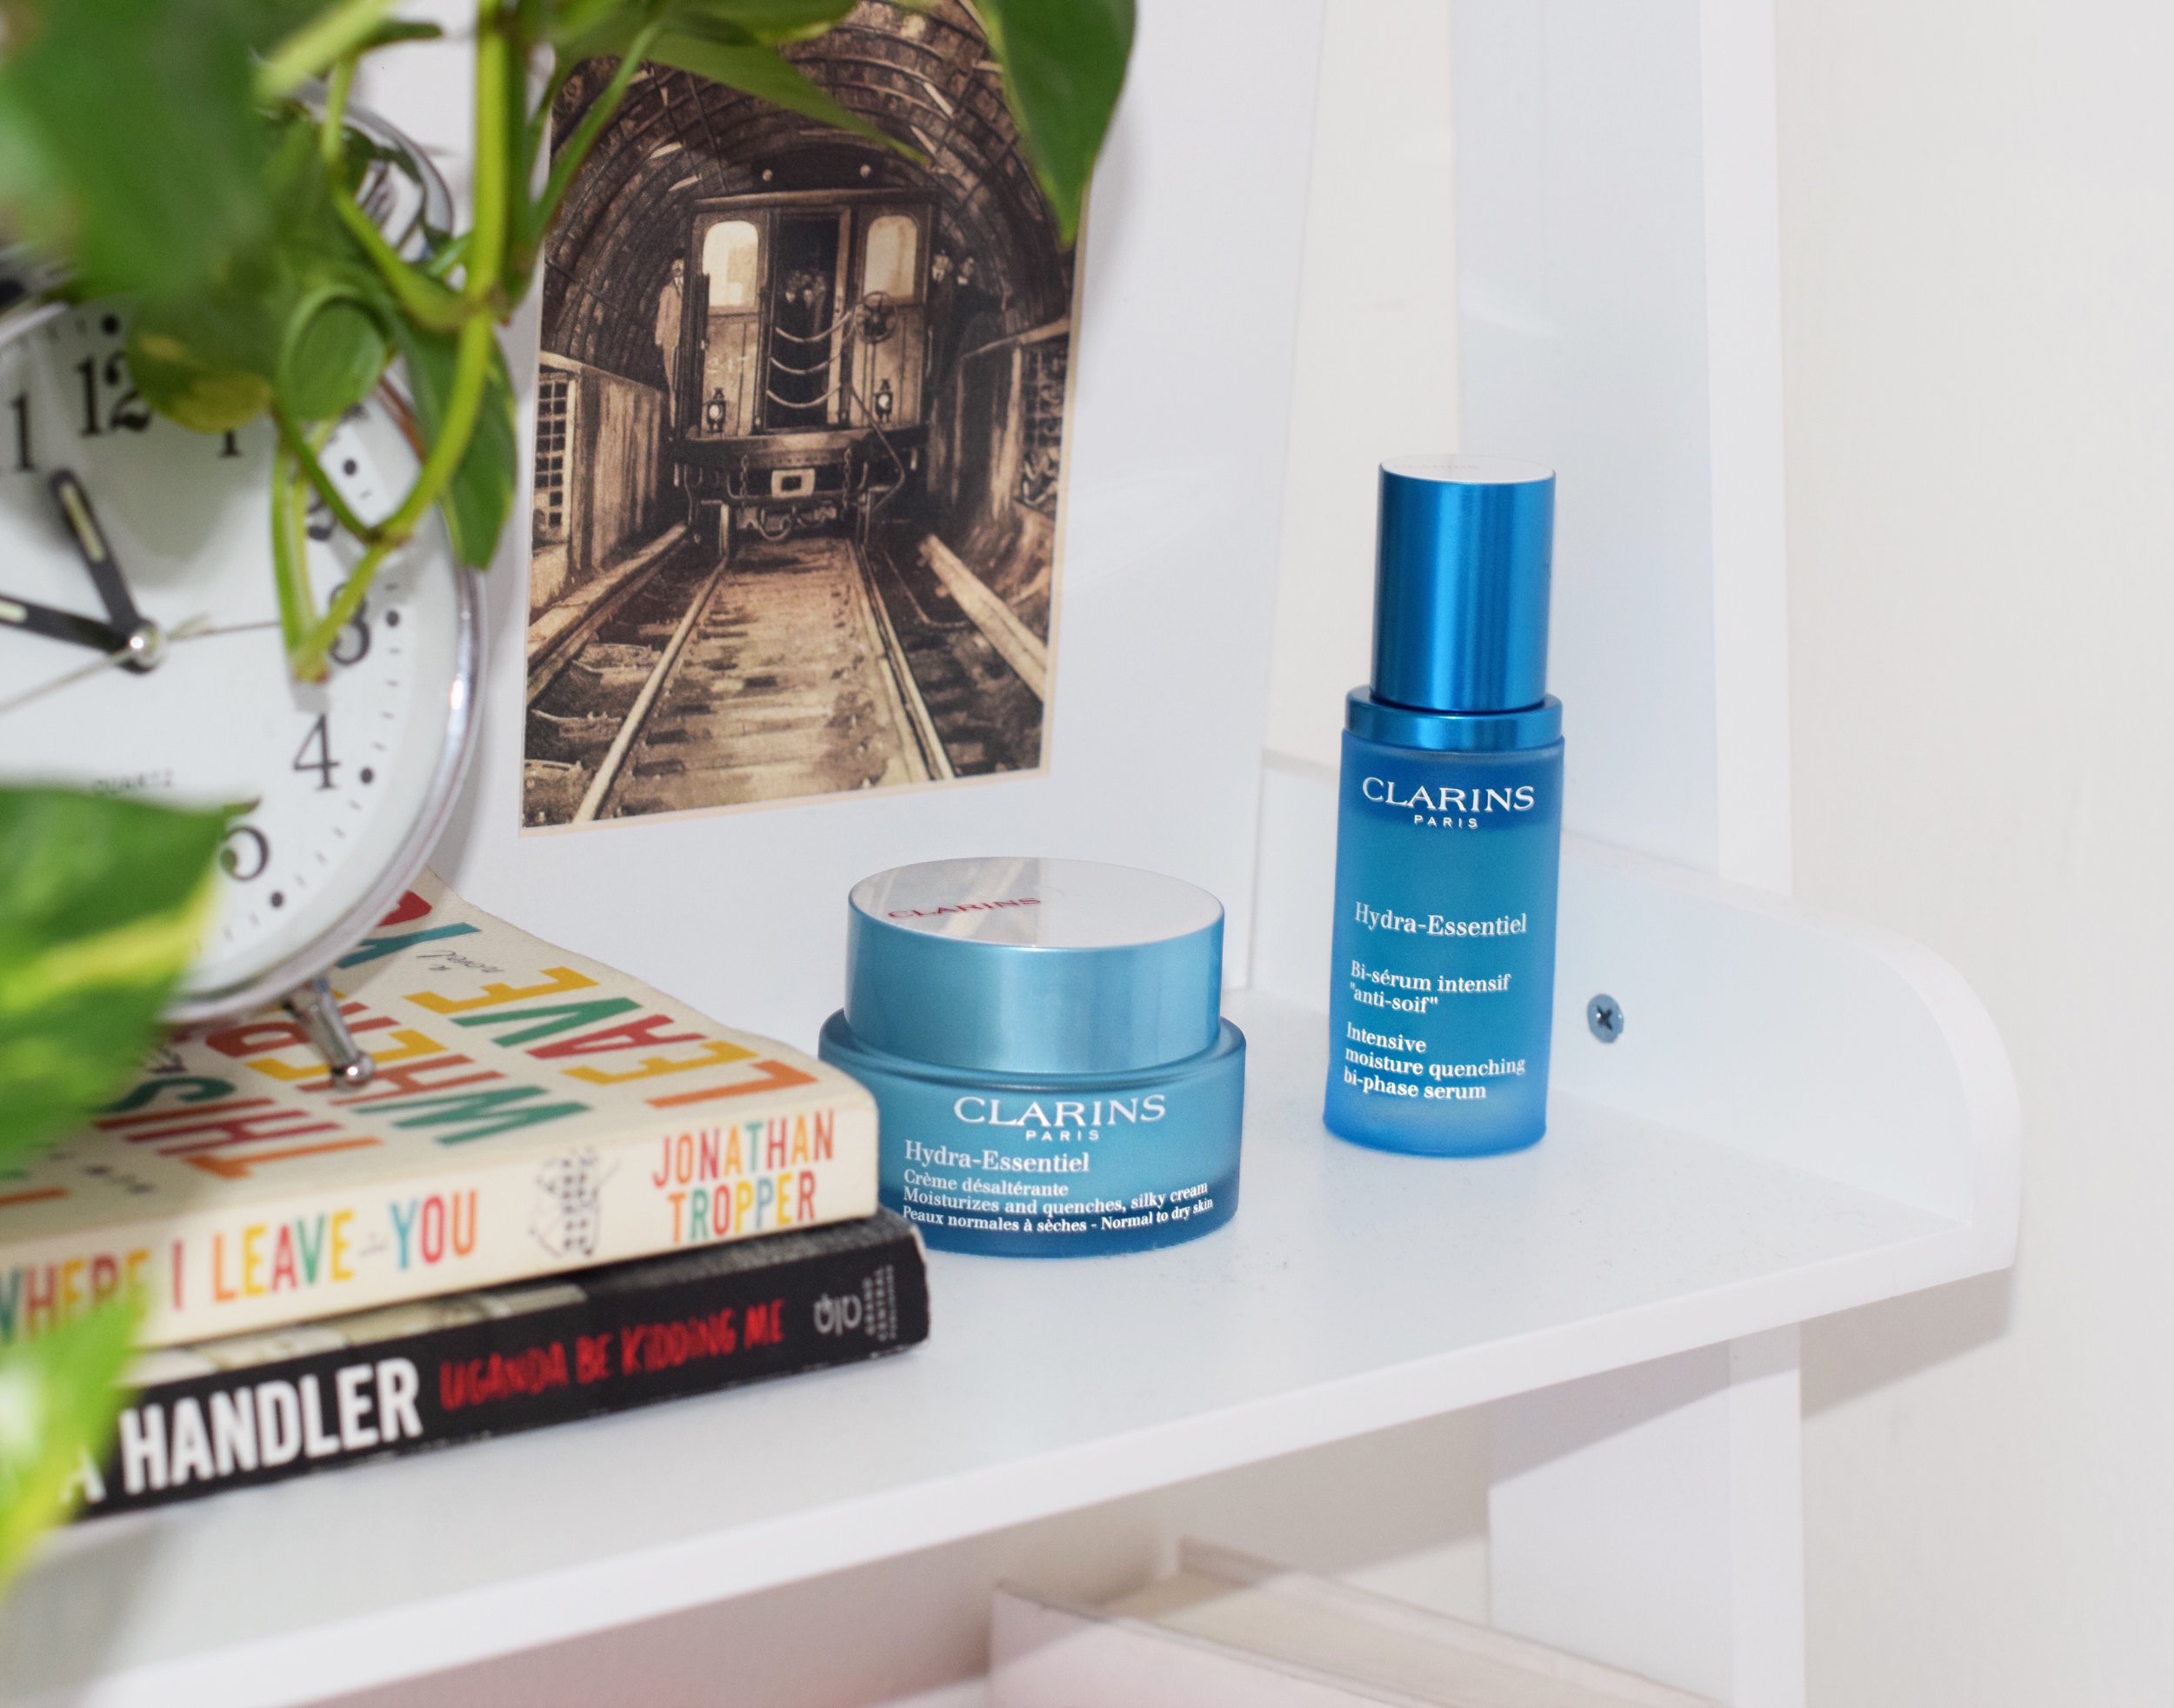 Clarins Hydra-Essentiel Bi-phase serum and moisturizer Louboutins & Love Esther Santer NYC Street Style Blogger Beauty Product Review Skin Routine Blue Packaging Shop Buy Lotion Girl Women  Skincare Sephora Macys Lord & Taylor.JPG